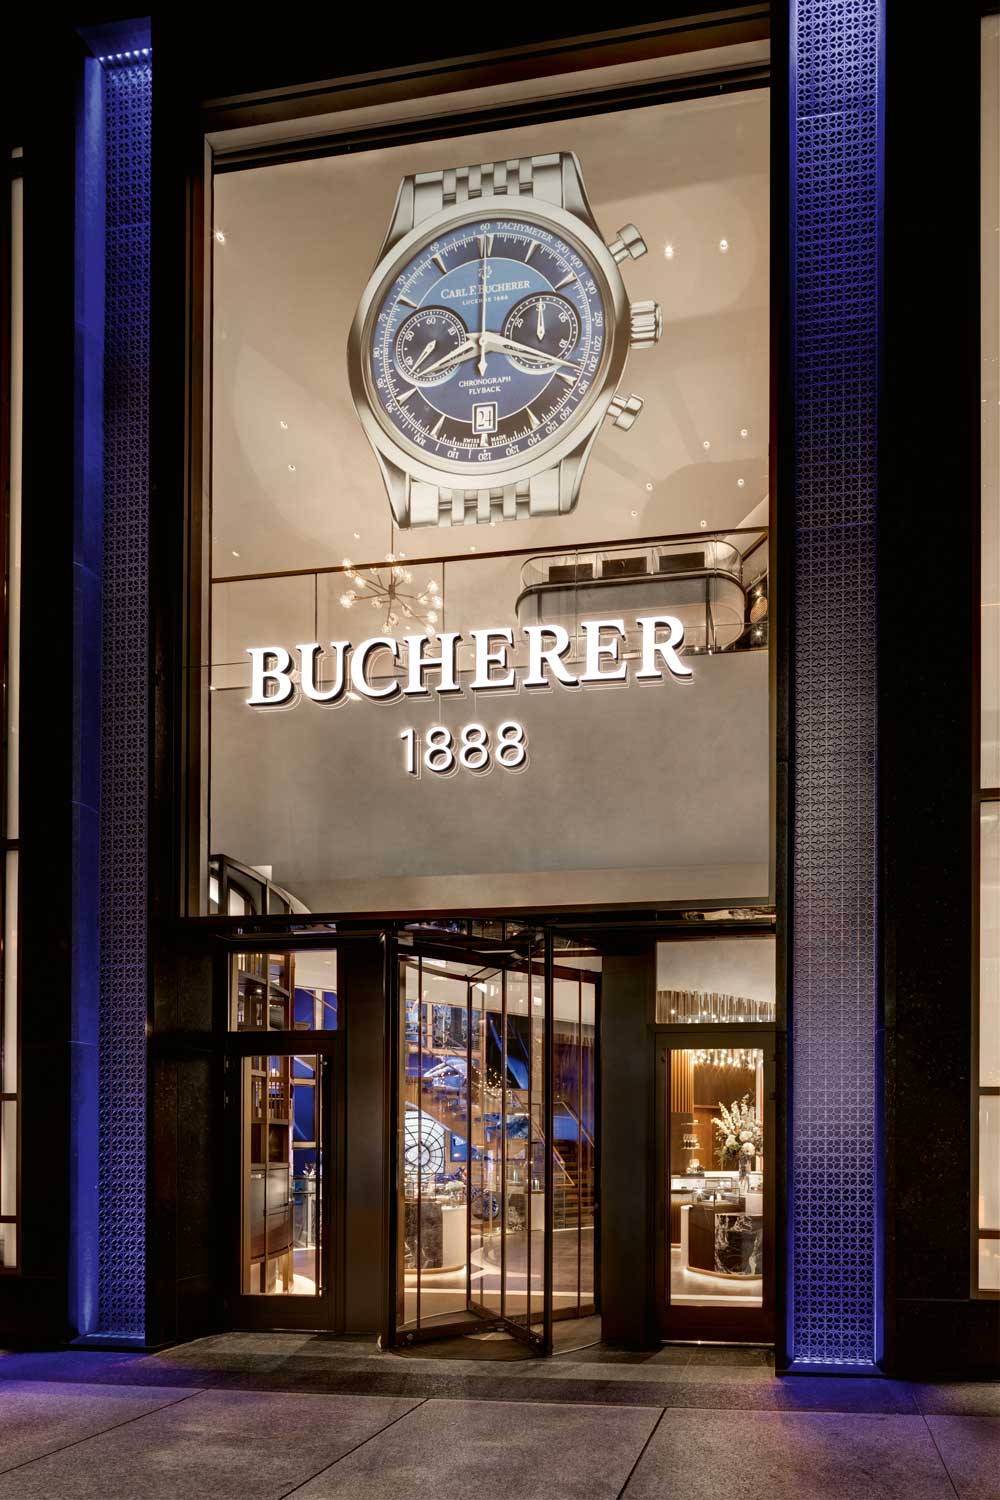 The Bucherer boutique on 57th Street in New York City